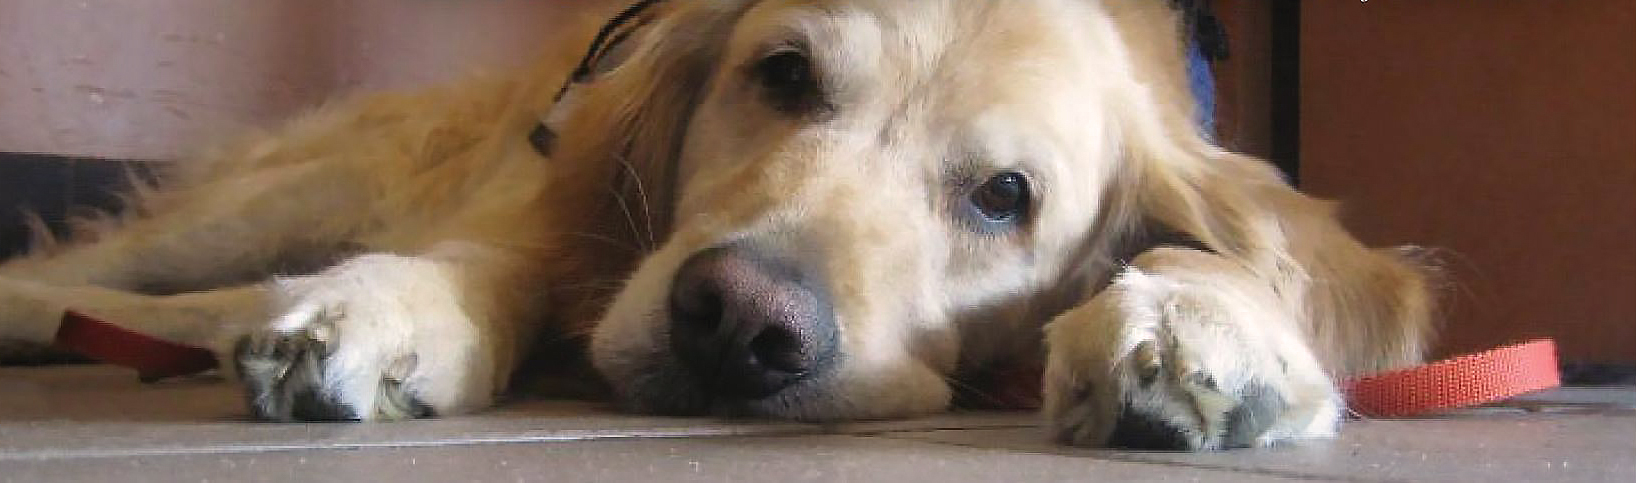 sweet labrador service dog resting and looking into the camera